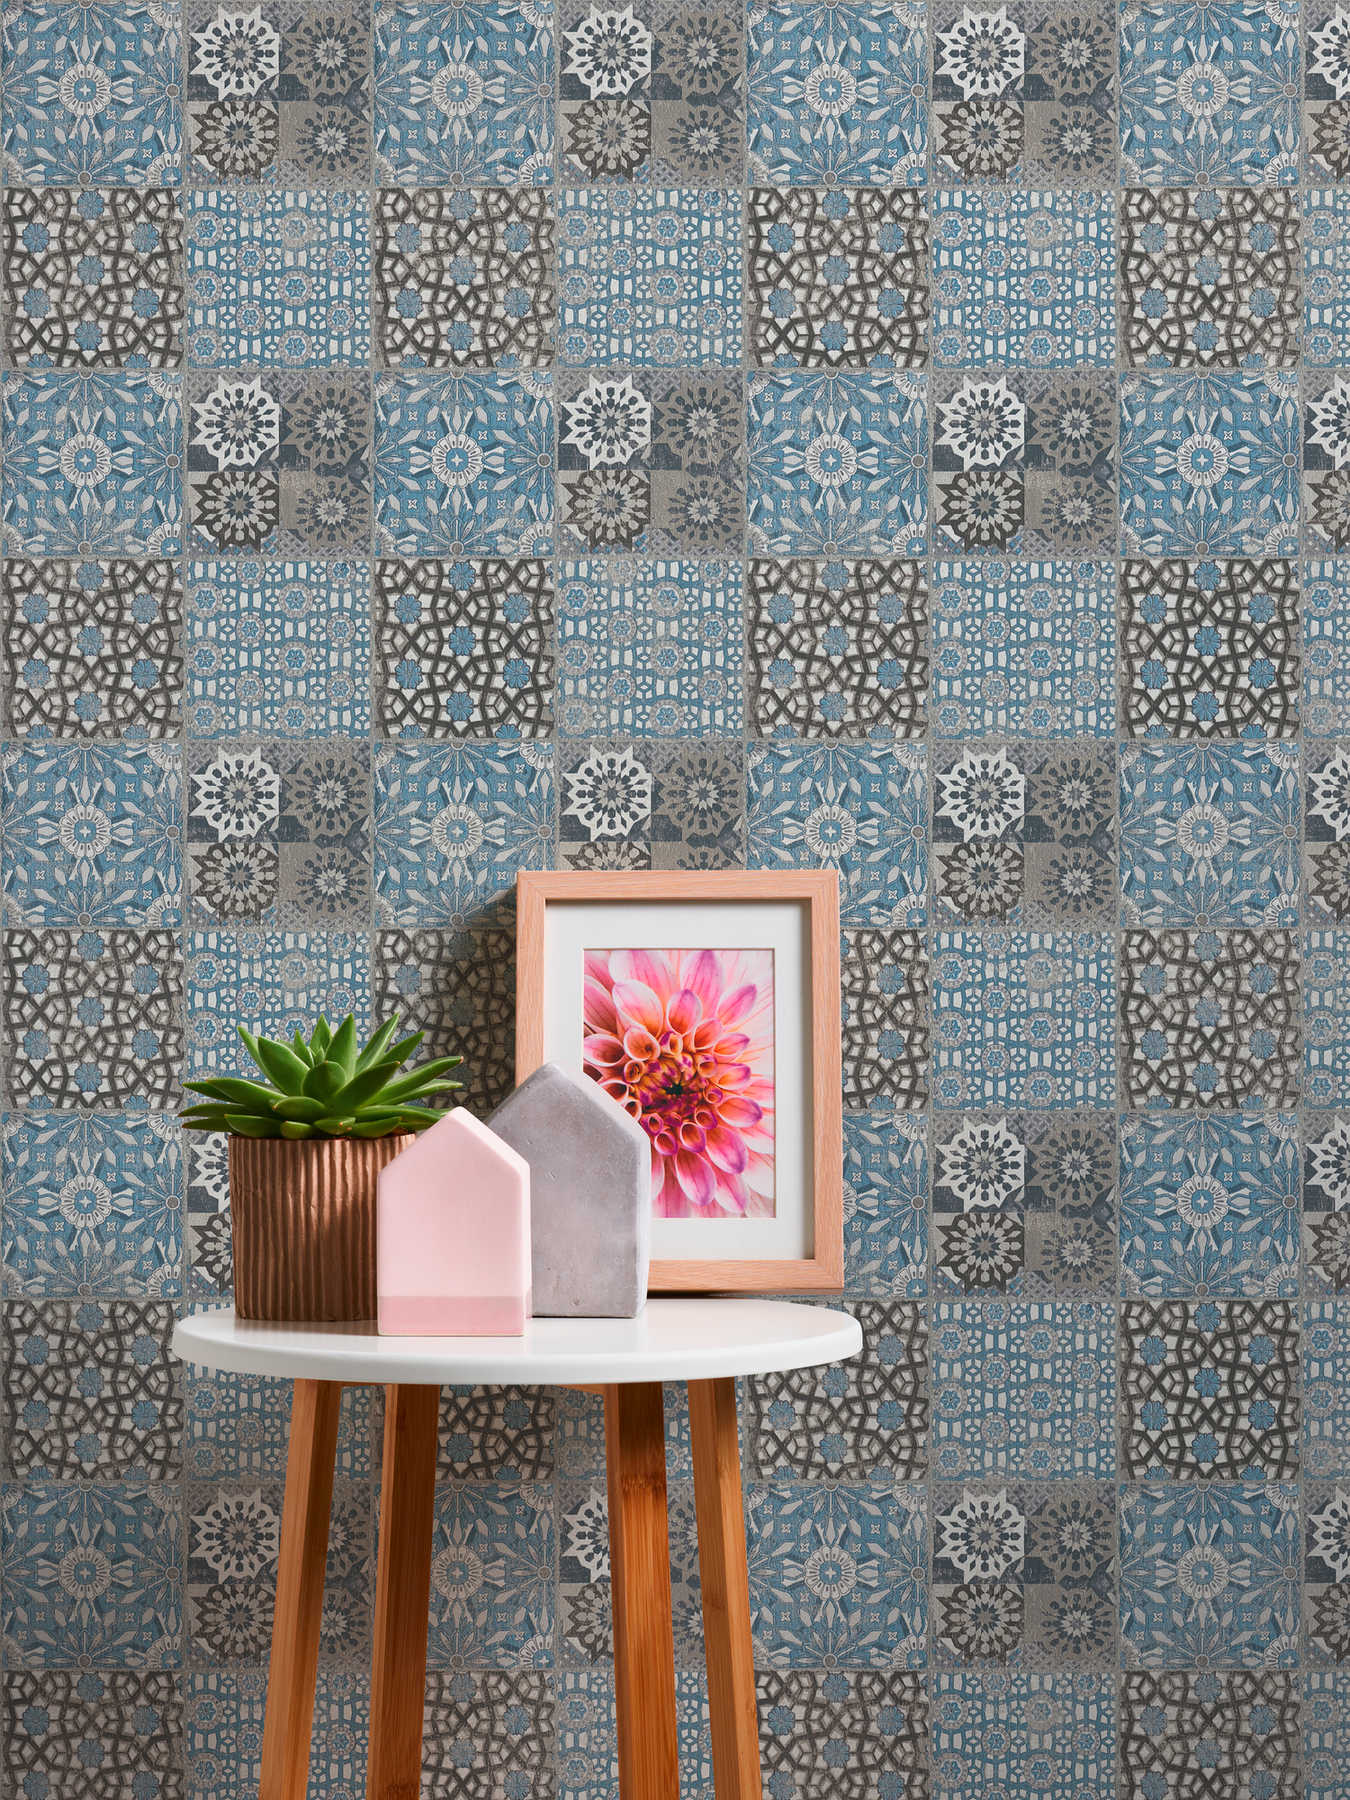             Tile wallpaper with retro pattern & used look - blue, grey
        